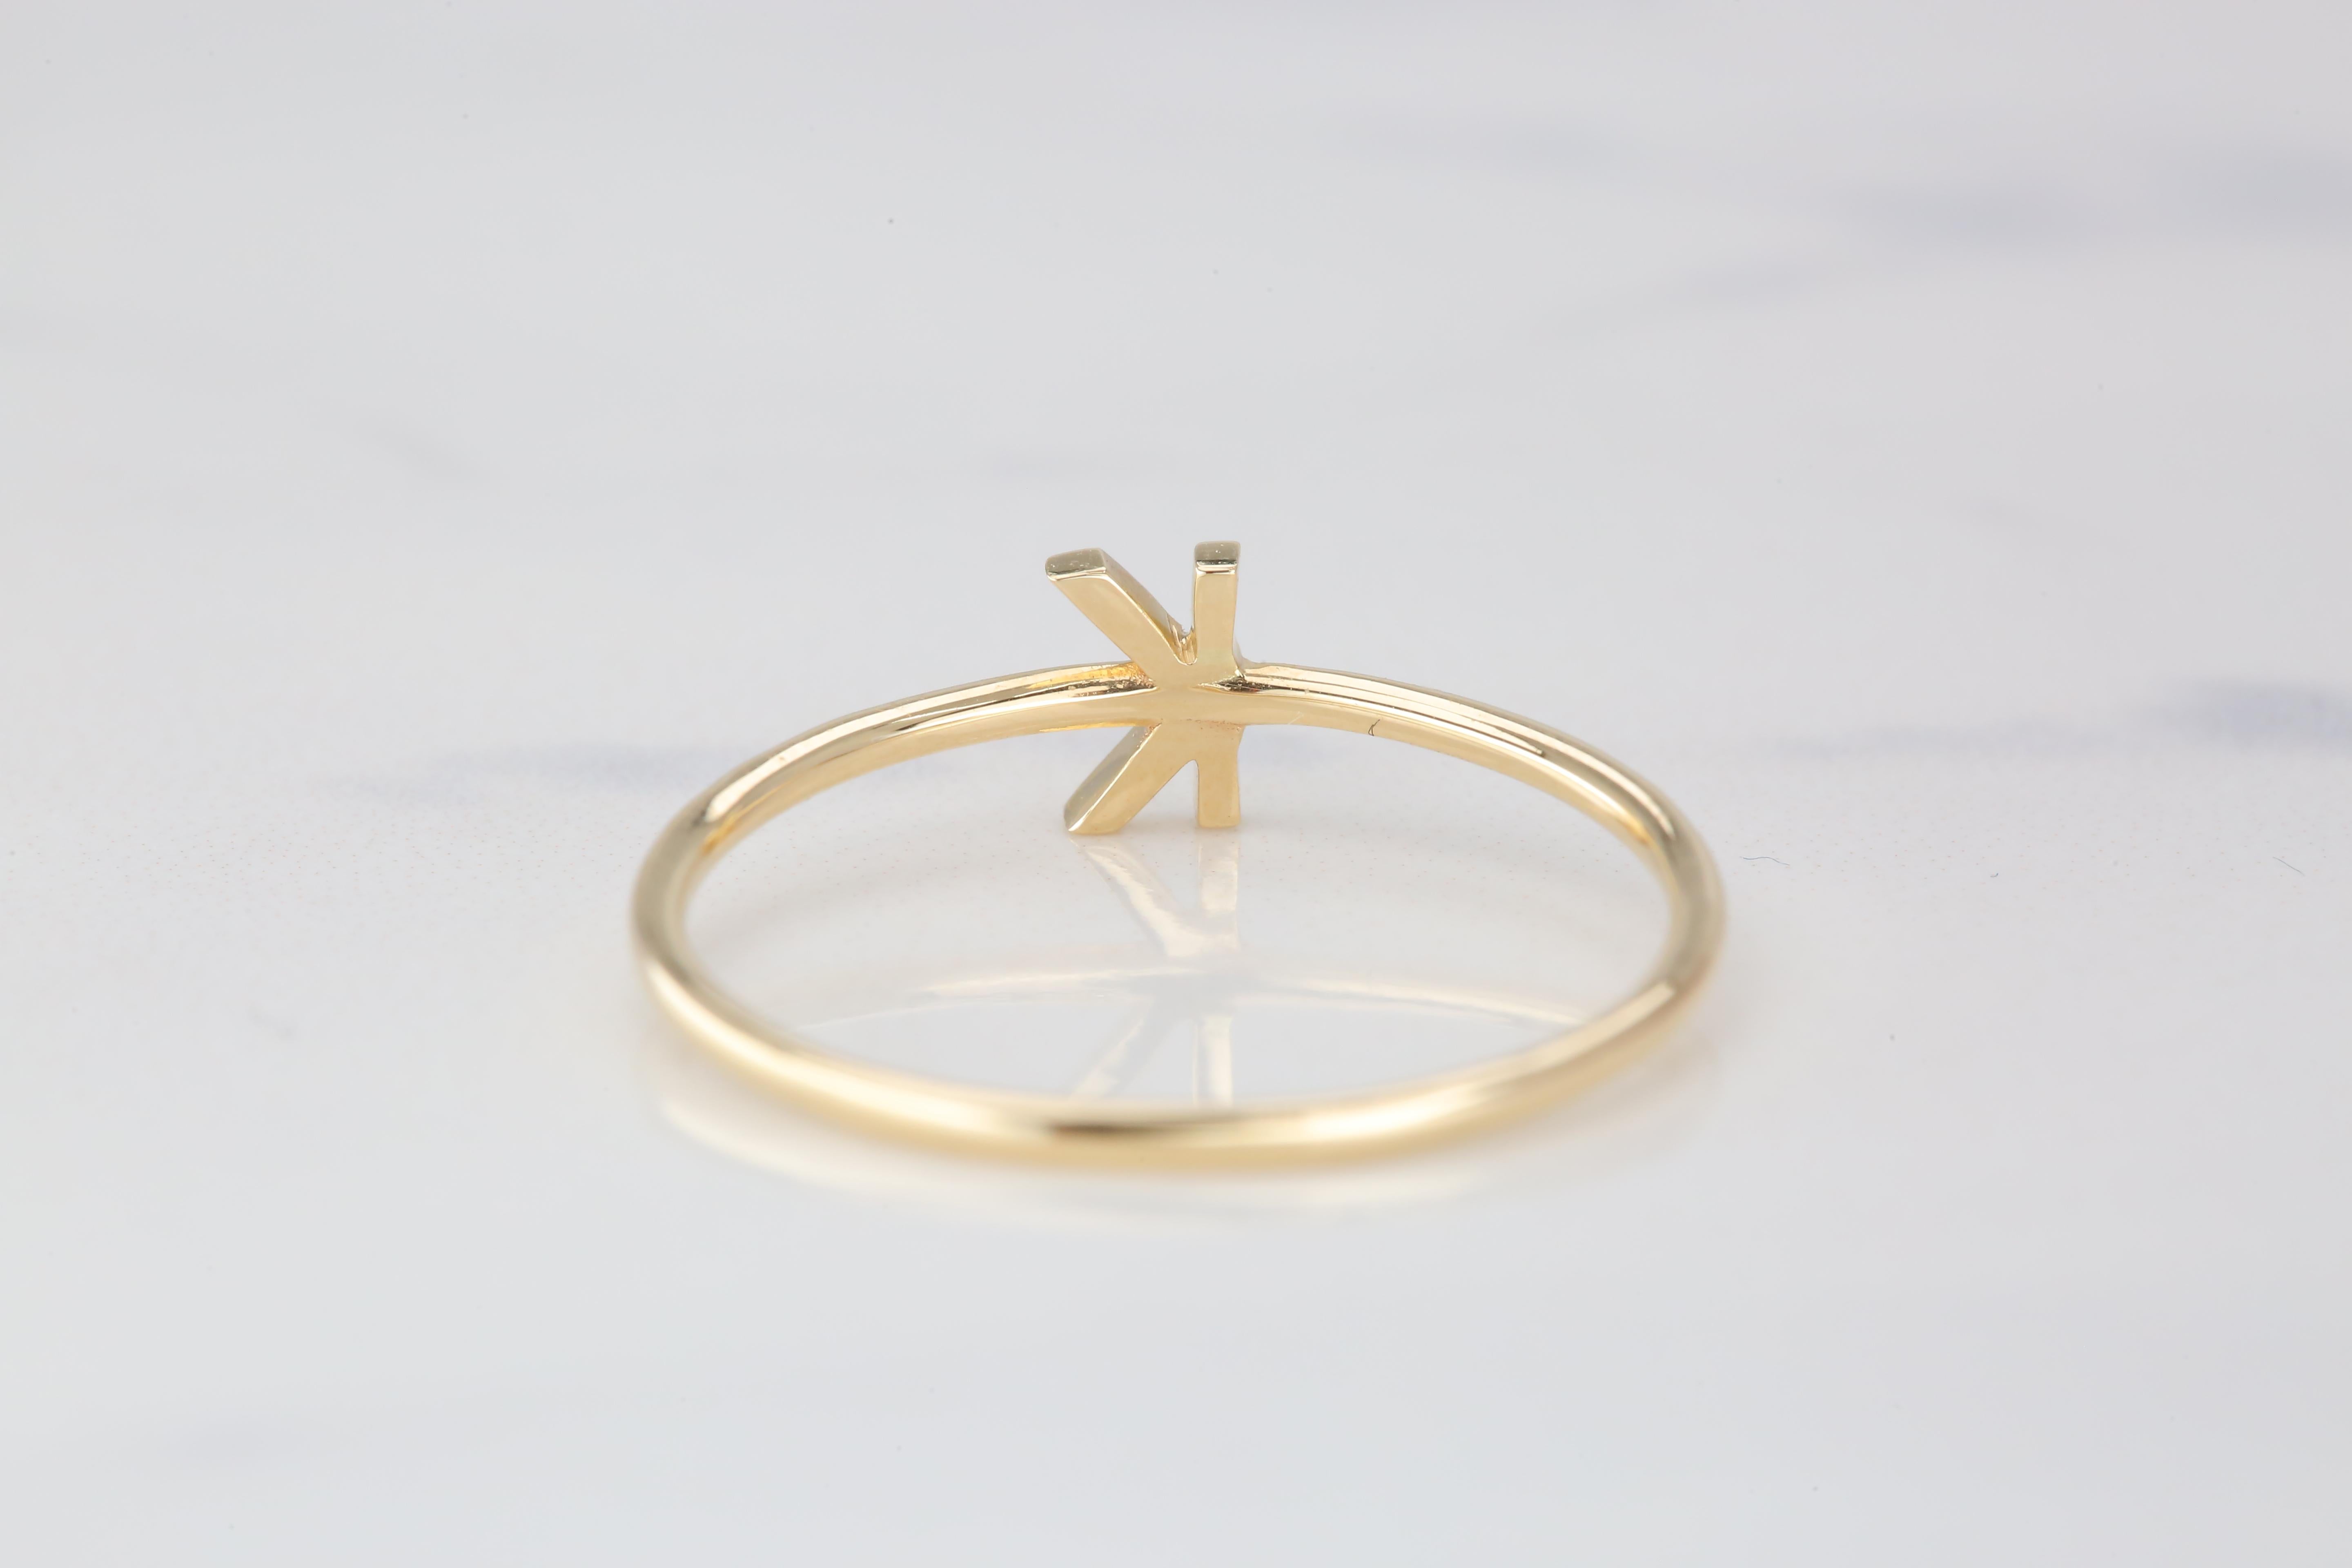 For Sale:  14K Gold Initial K Letter Ring, Personalized Initial Letter Ring 6